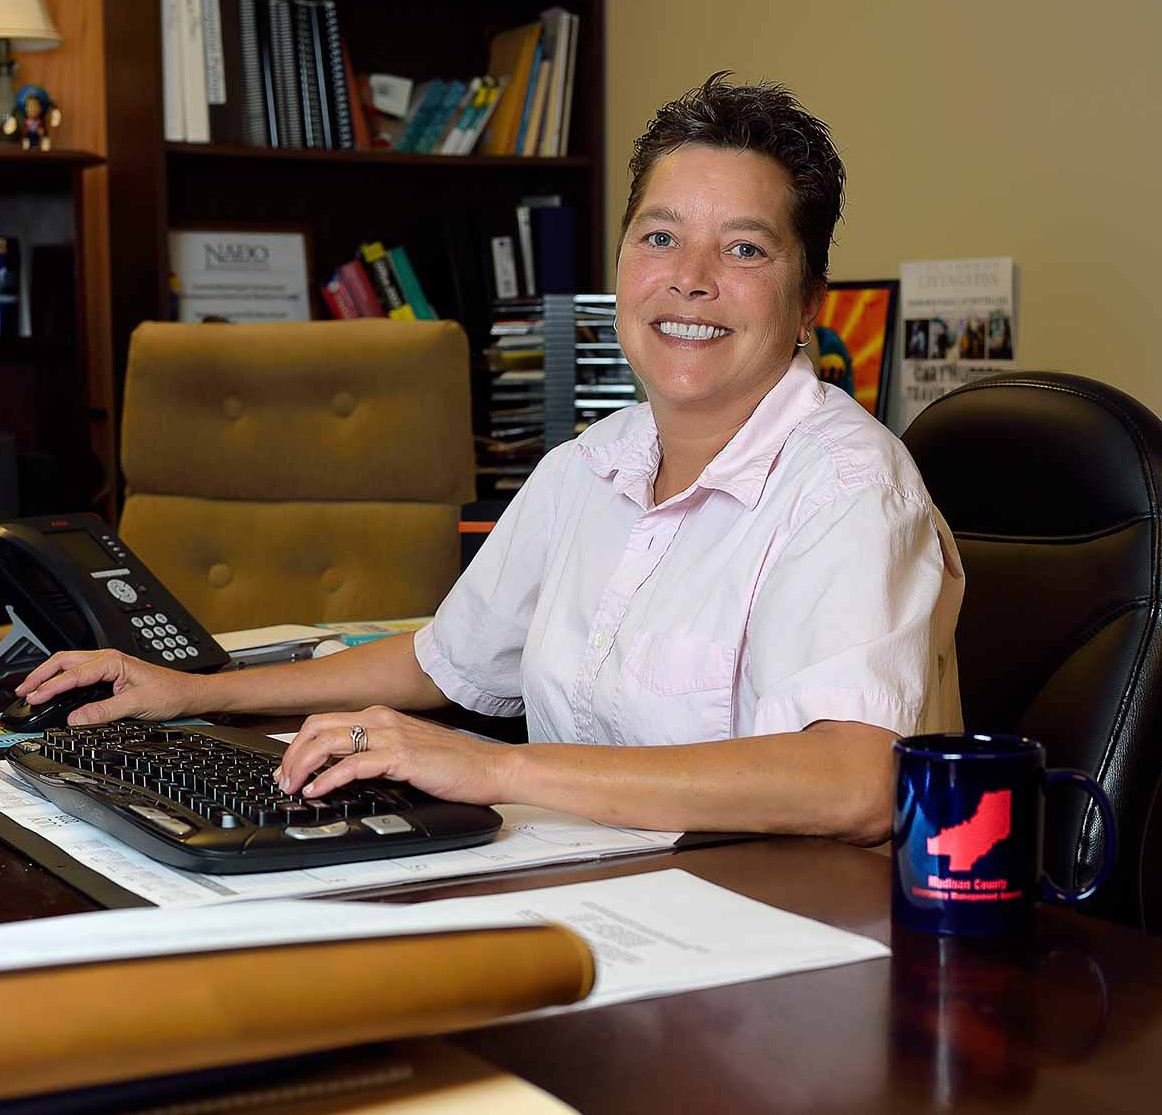 A woman with short hair and a collared, light pink shirt sits at her desk smiling. Her desk has papers and notebooks on it, along with a coffee mug, keyboard, and office phone.